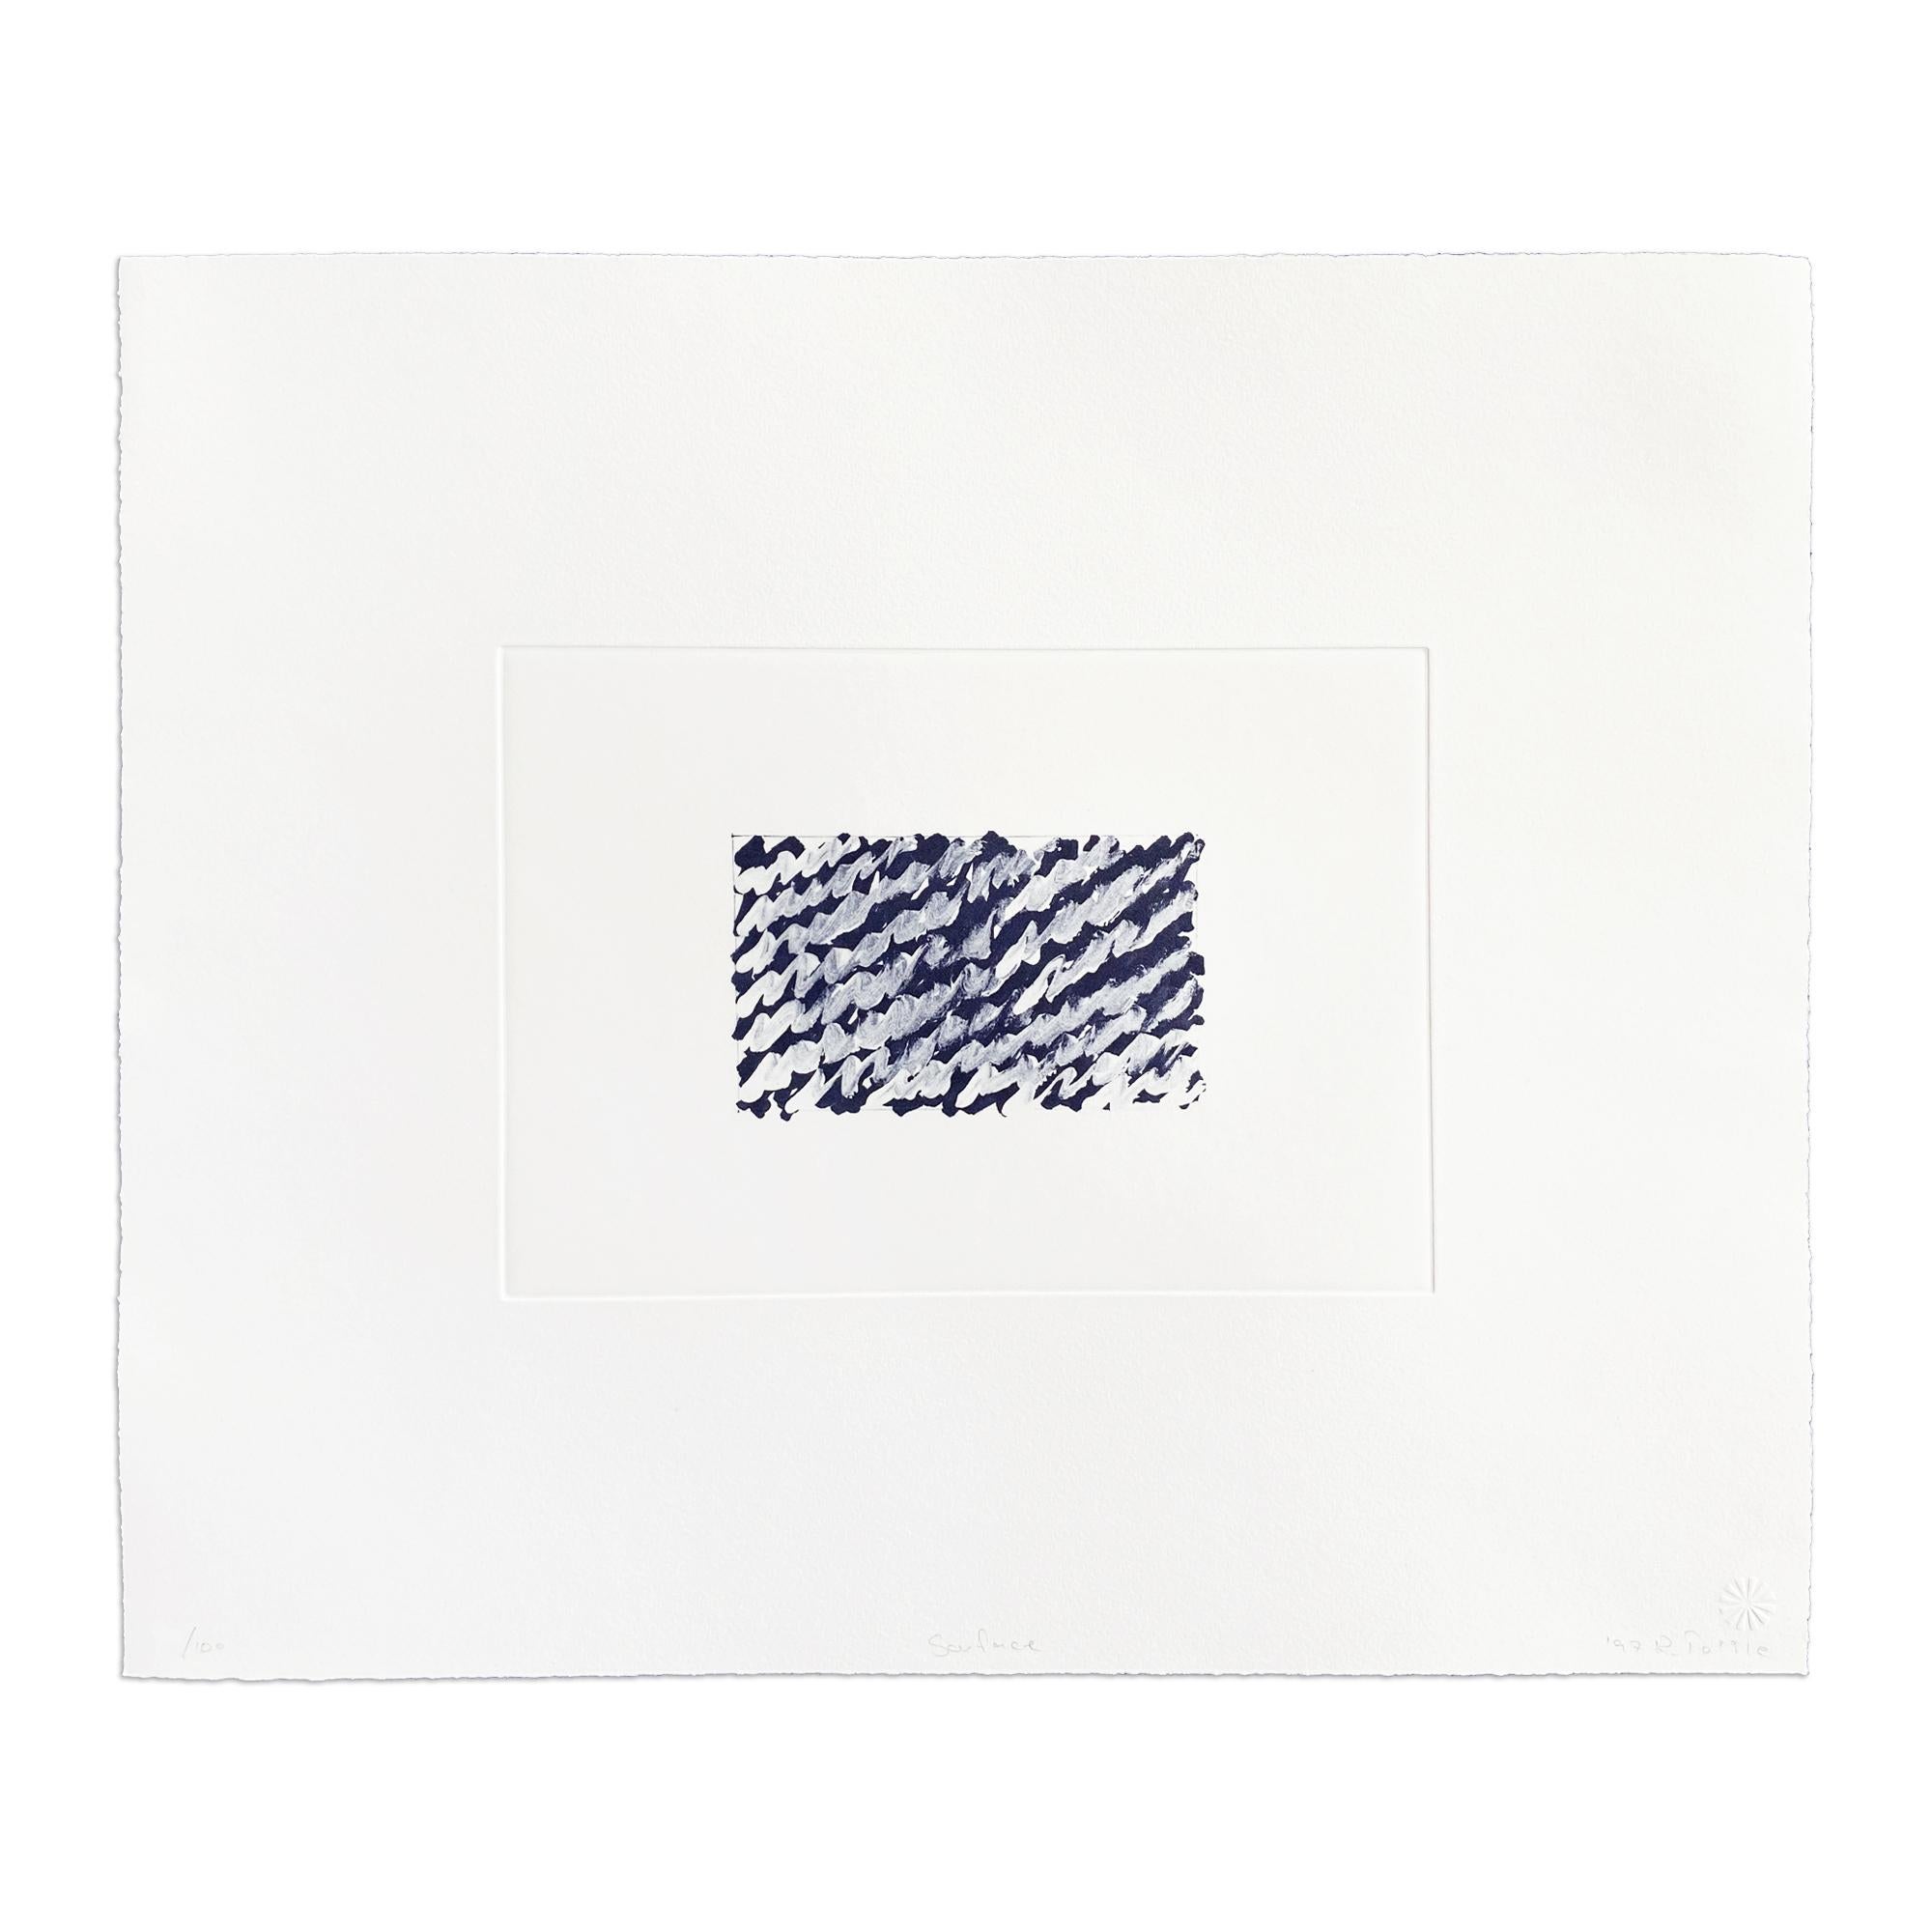 Richard Tuttle (American, b. 1941)
Surface, 1997
Medium: Photogravure on wove paper
Dimensions: 15 x 17-3/4 in
Edition of 100: Hand signed and numbered
Condition: Excellent